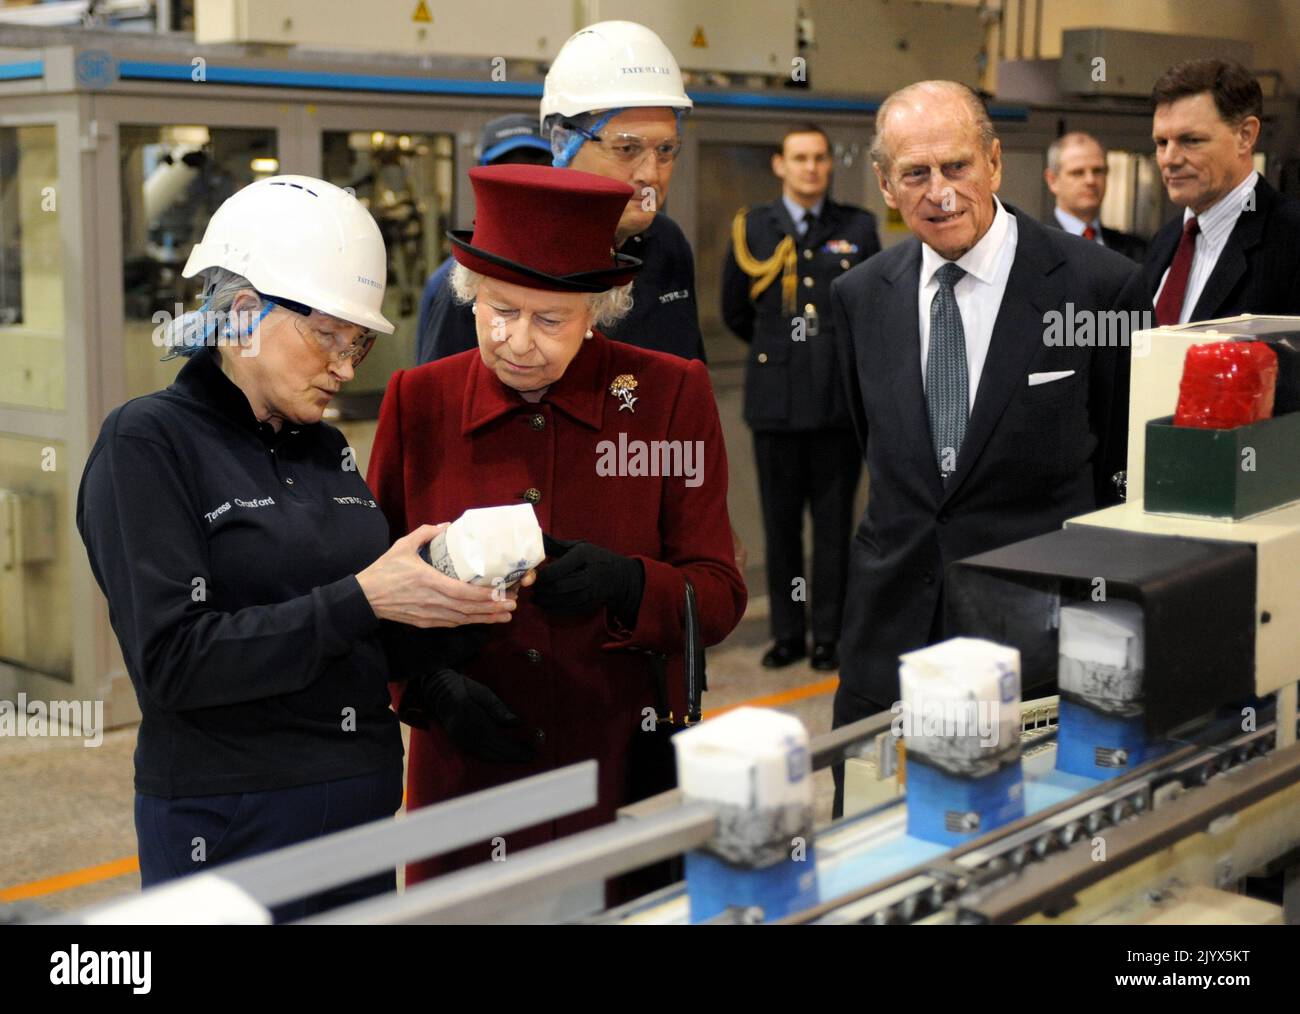 File photo dated 13/03/2008 of Queen Elizabeth II speaking to Tate & Lyle Packing Area Supervisor Teresa Croxford during a visit with the Duke of Edinburgh to the east London sugar refinery, which was celebrating 130 years of production. The Queen died peacefully at Balmoral this afternoon, Buckingham Palace has announced. Issue date: Thursday September 8, 2022. Stock Photo